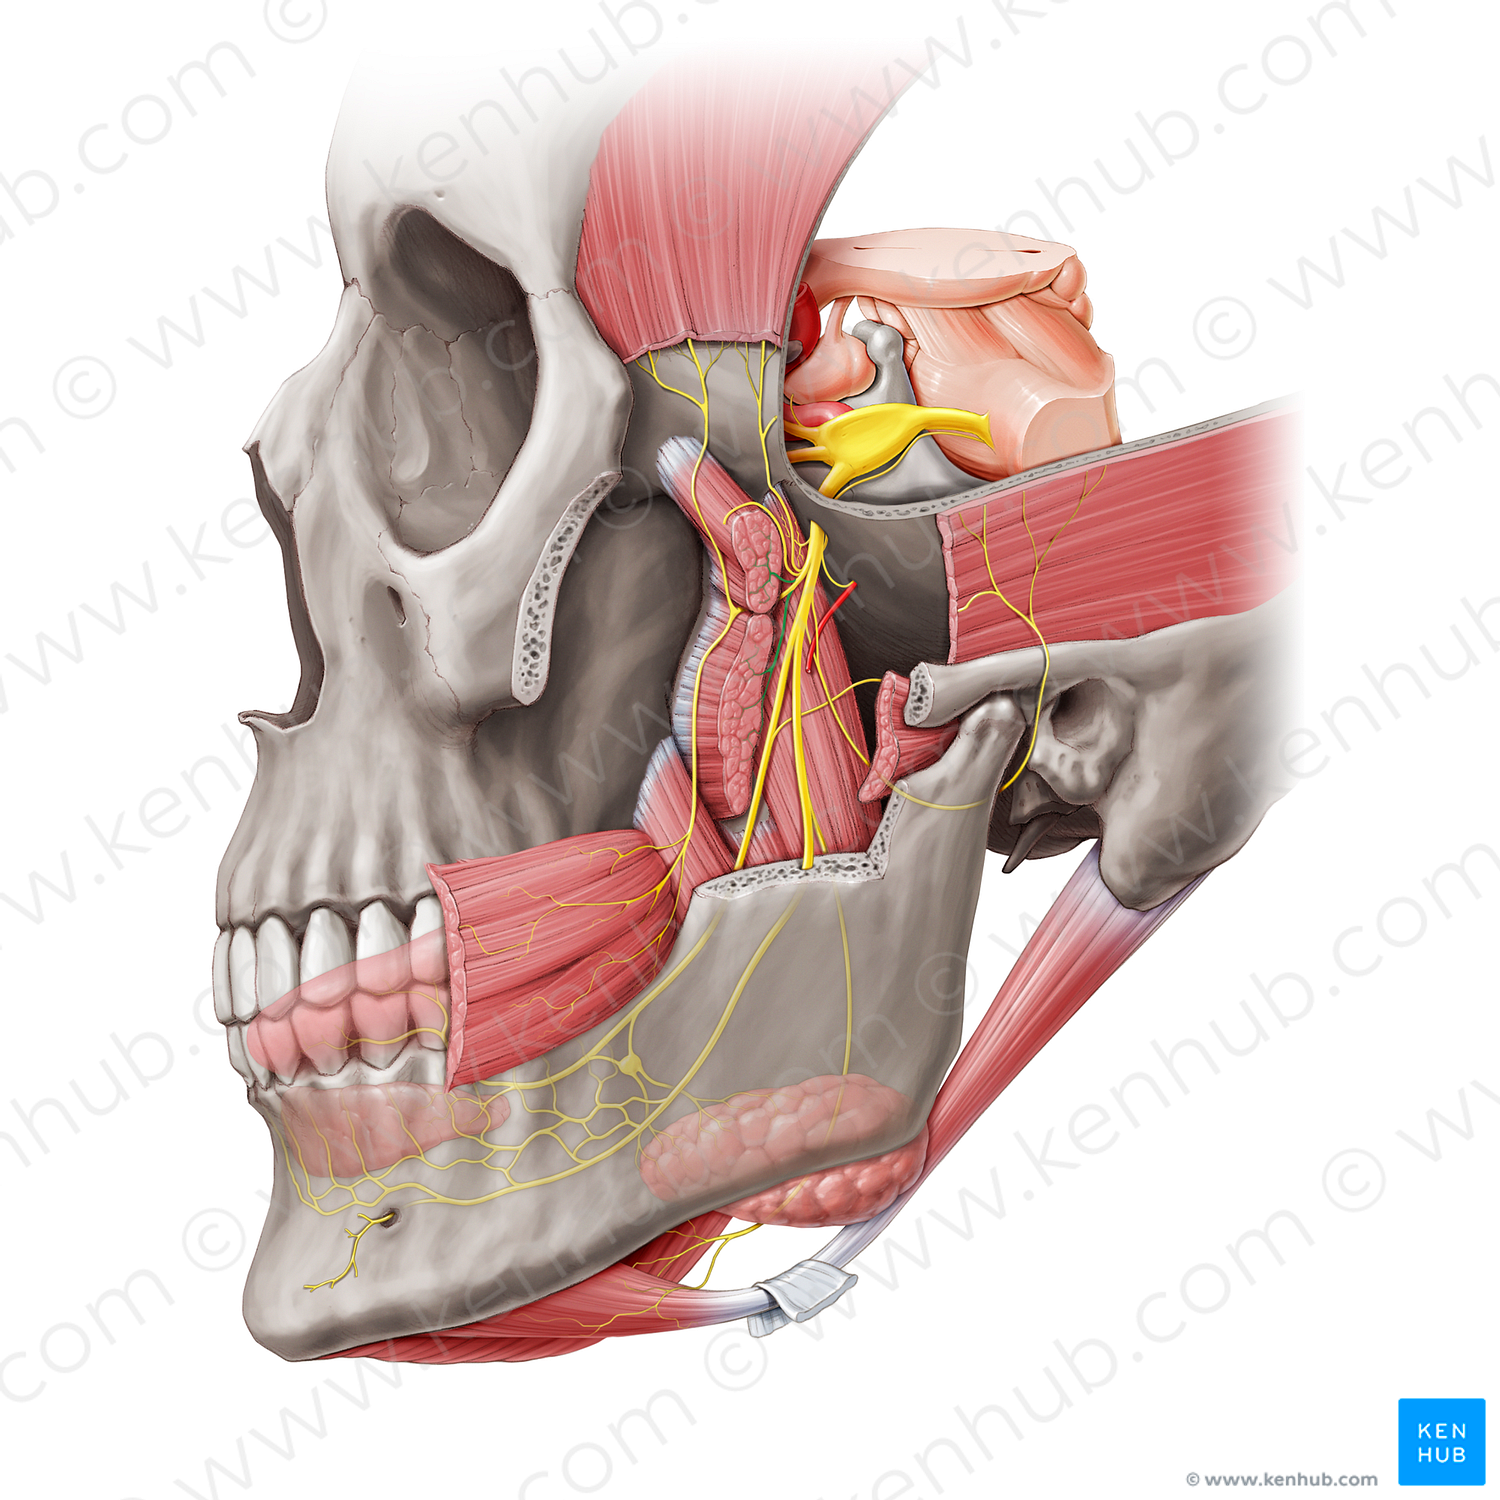 Nerve to lateral pterygoid muscle (#20460)